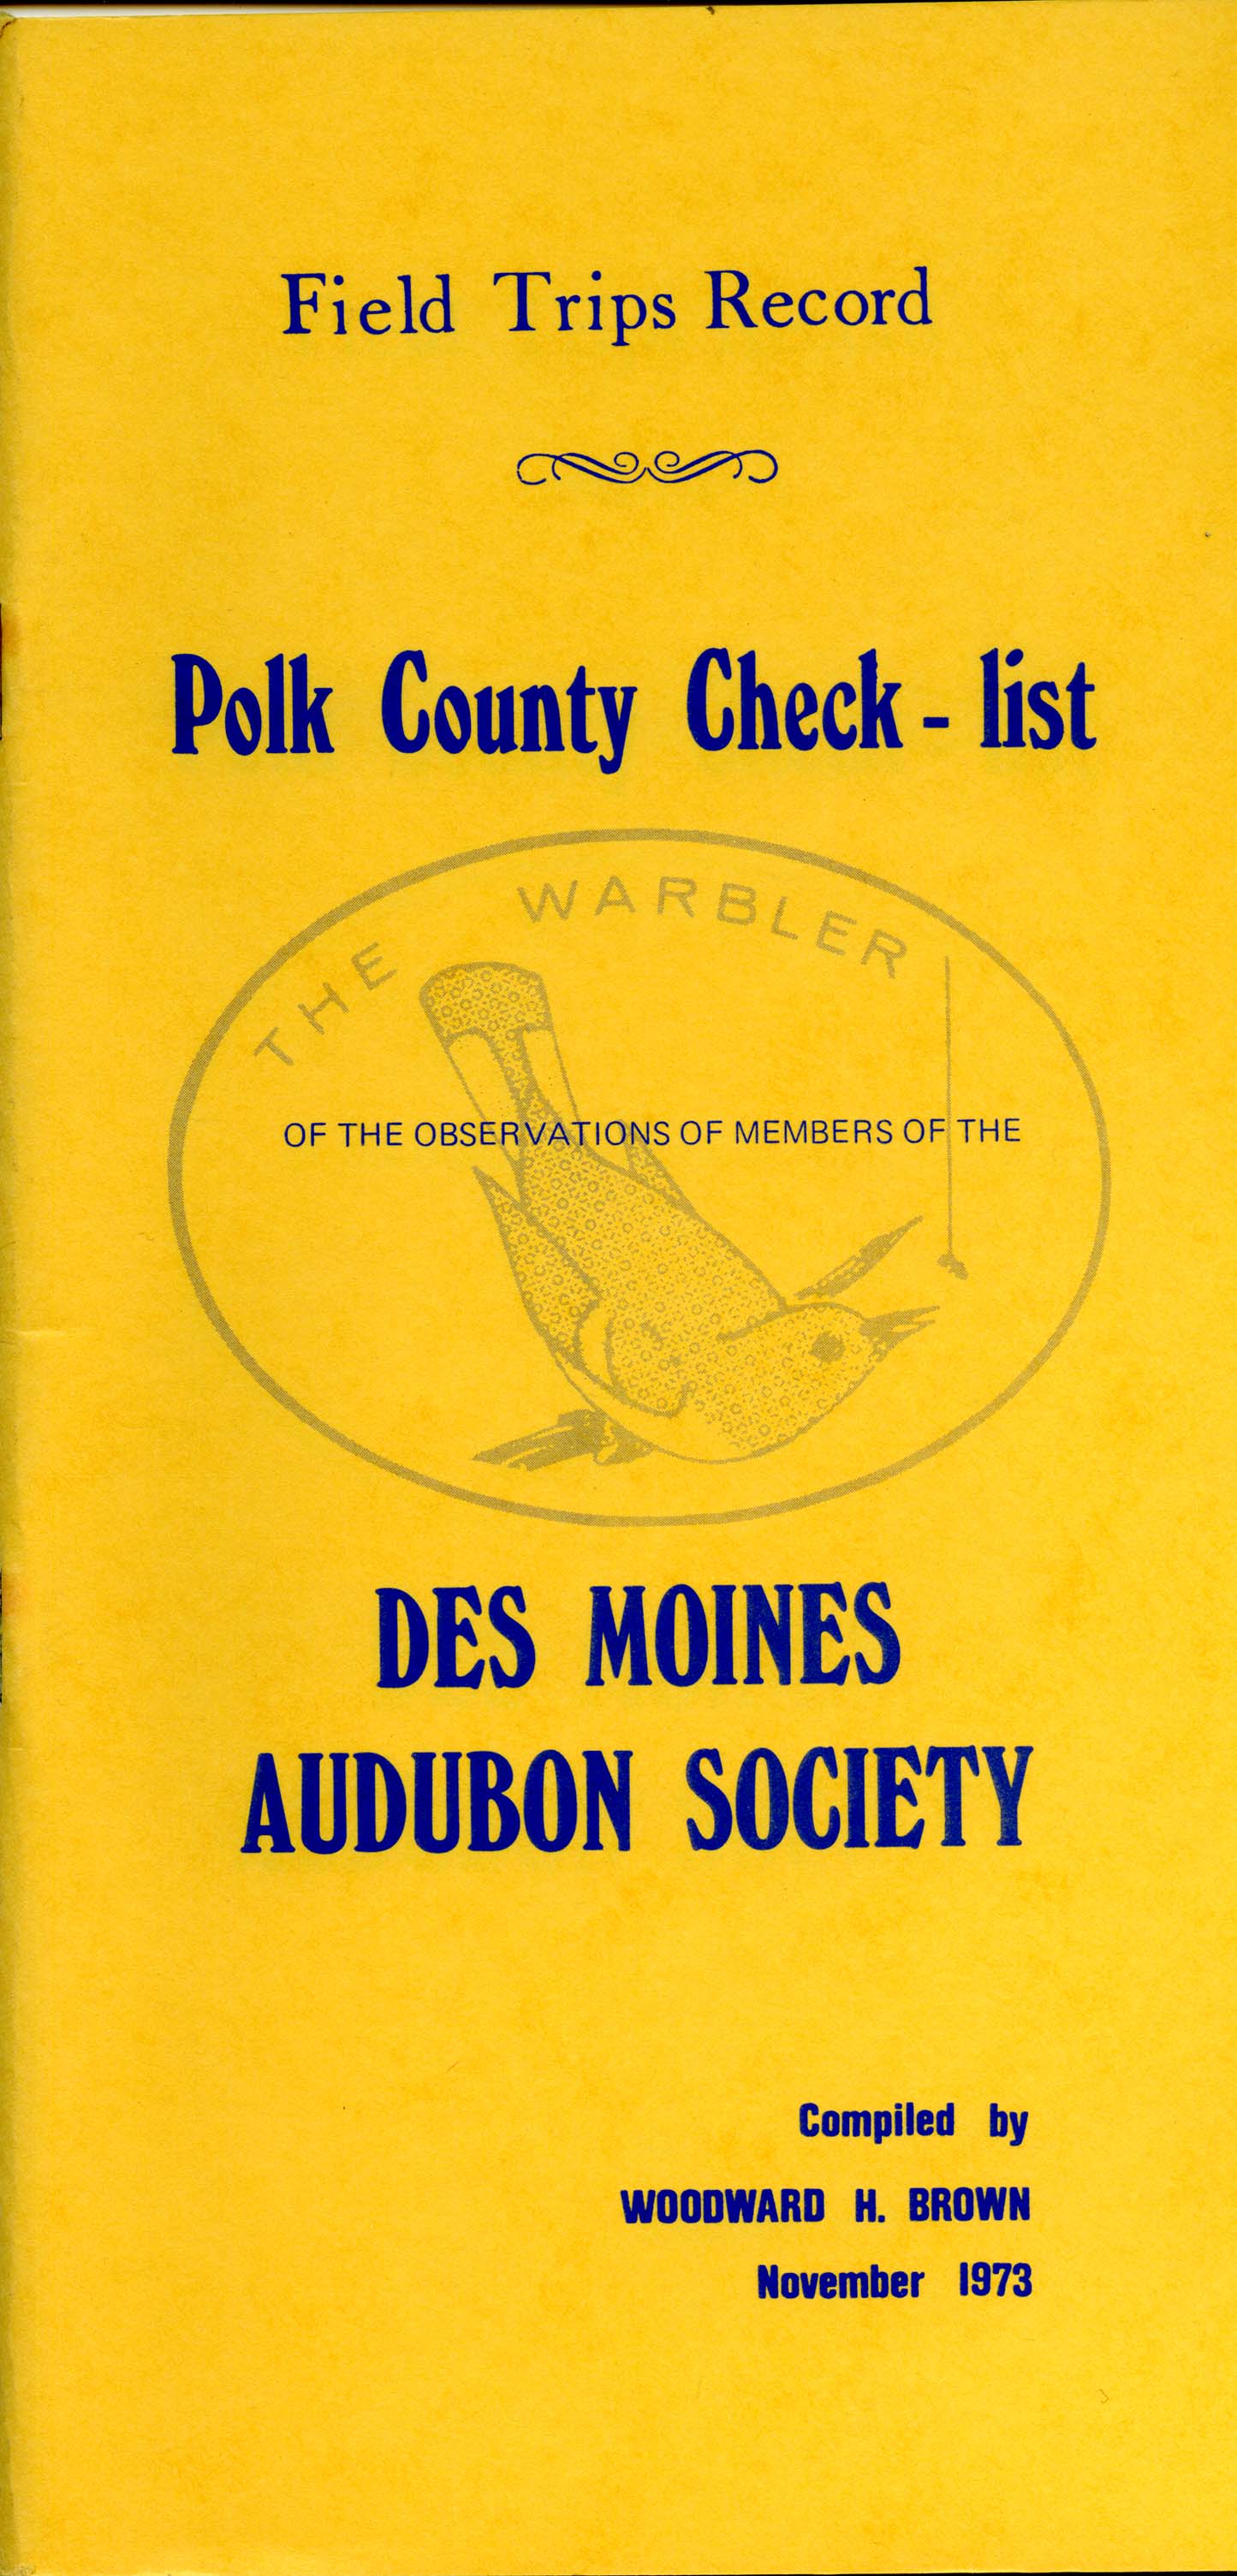 Polk County check-list of the observations of members of the Des Moines Audubon Society